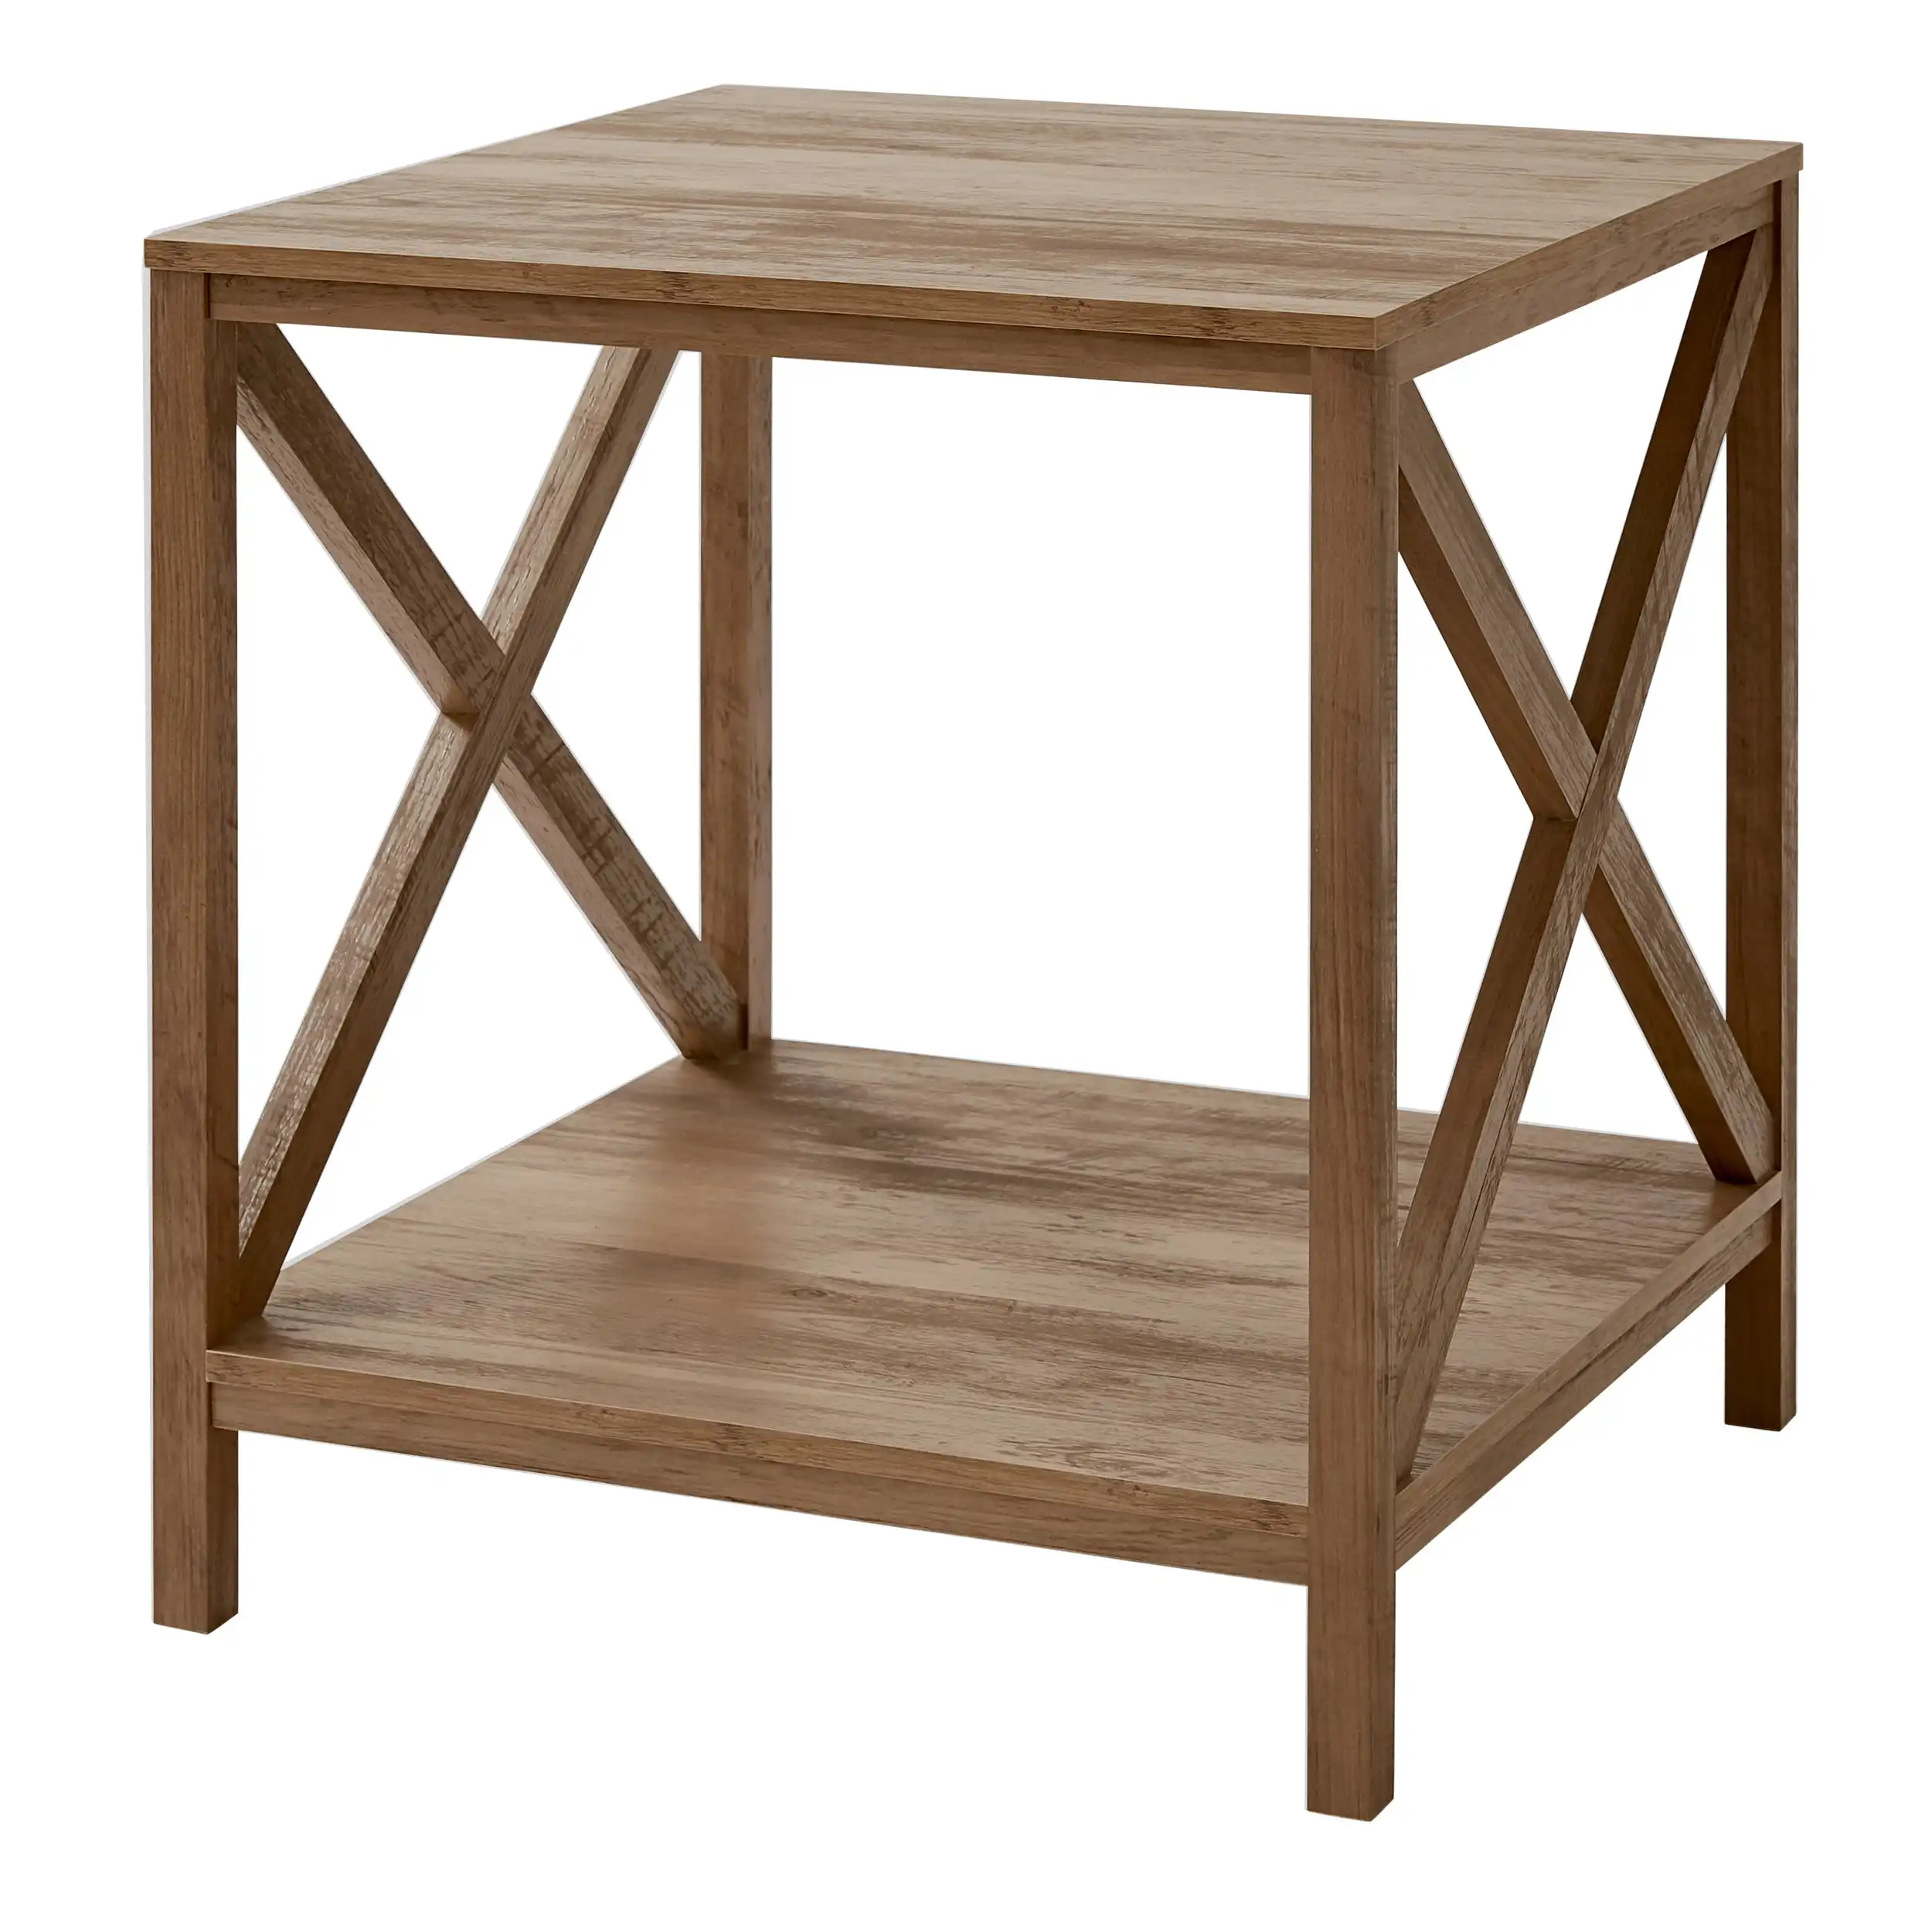 Farmhouse Wooden Side Table Coffee Table And Flower Display Stand For Home